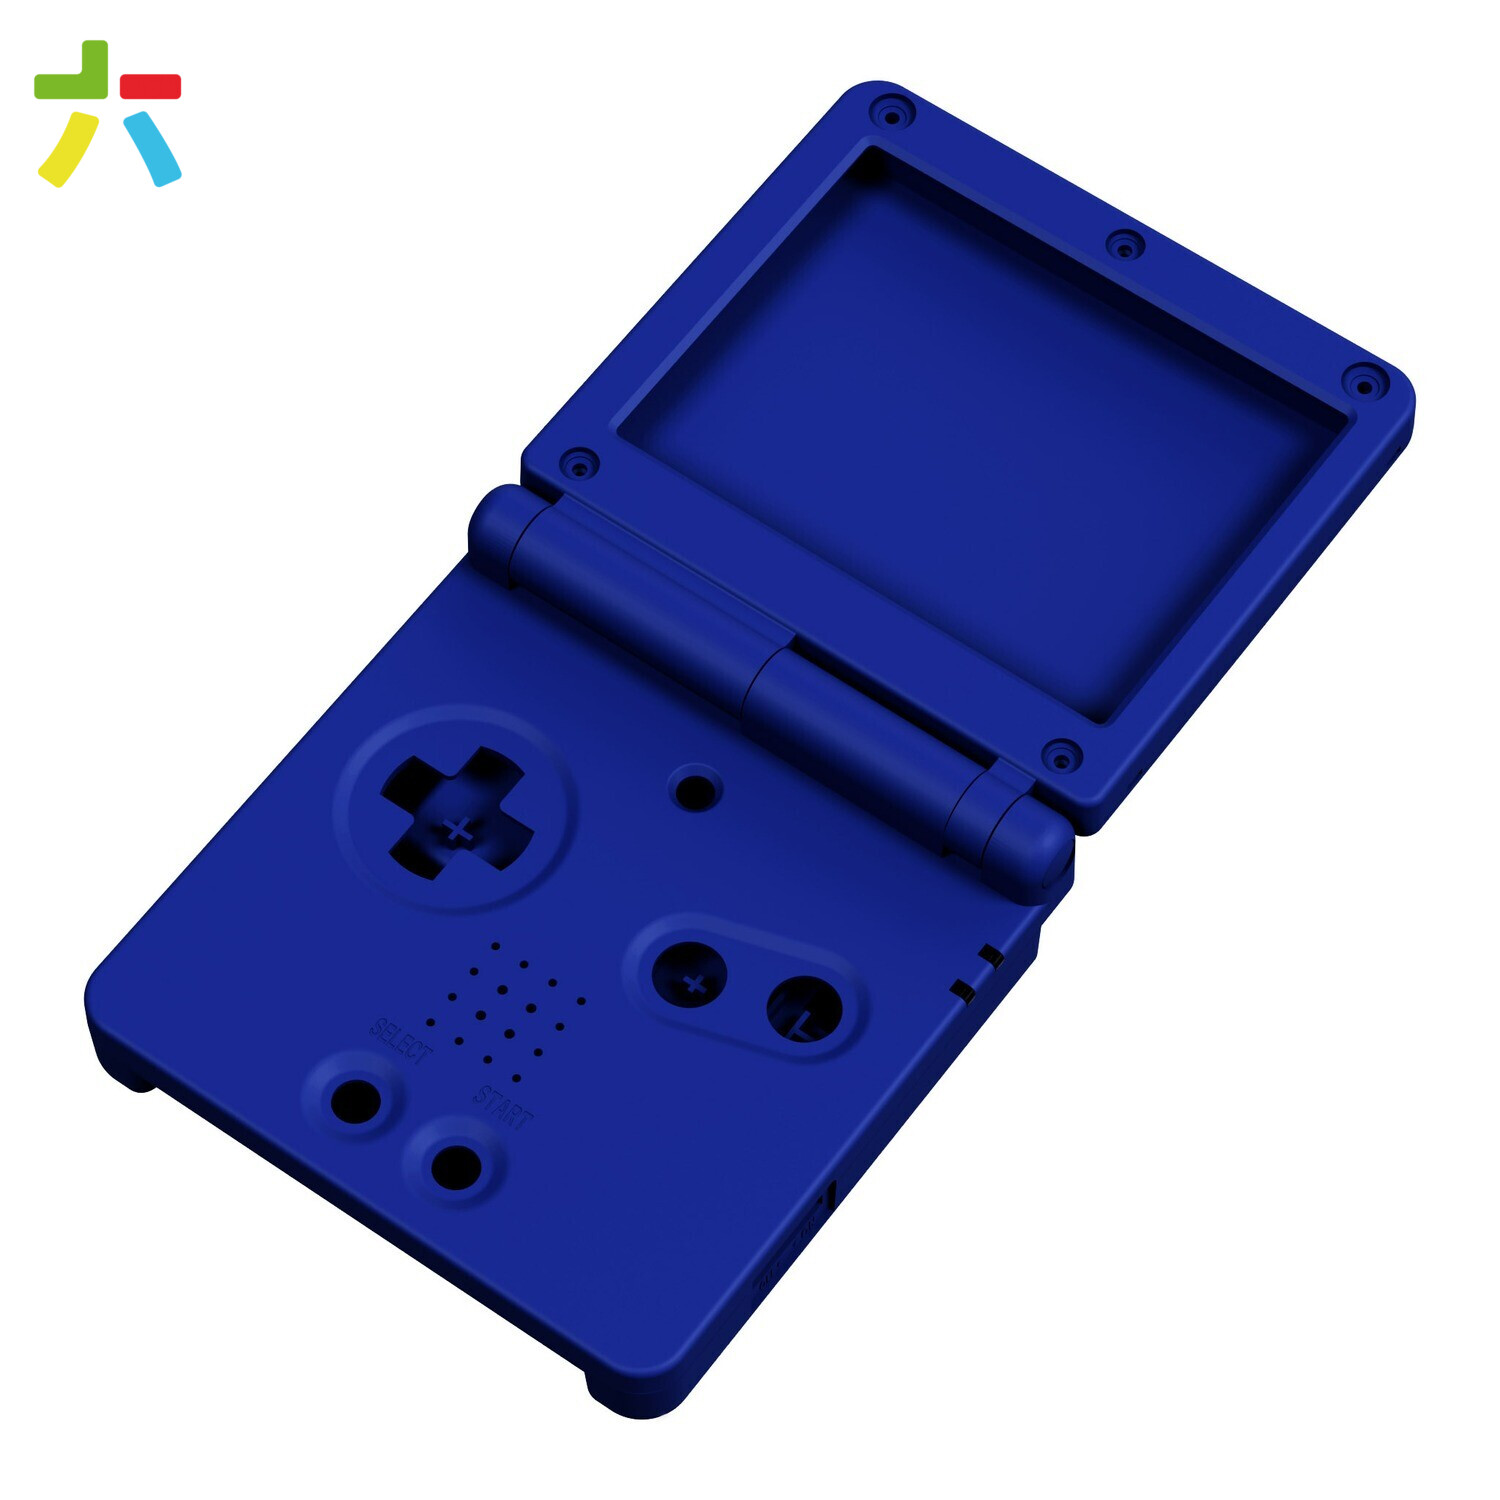 Game Boy Advance SP Shell (Solid Blue)